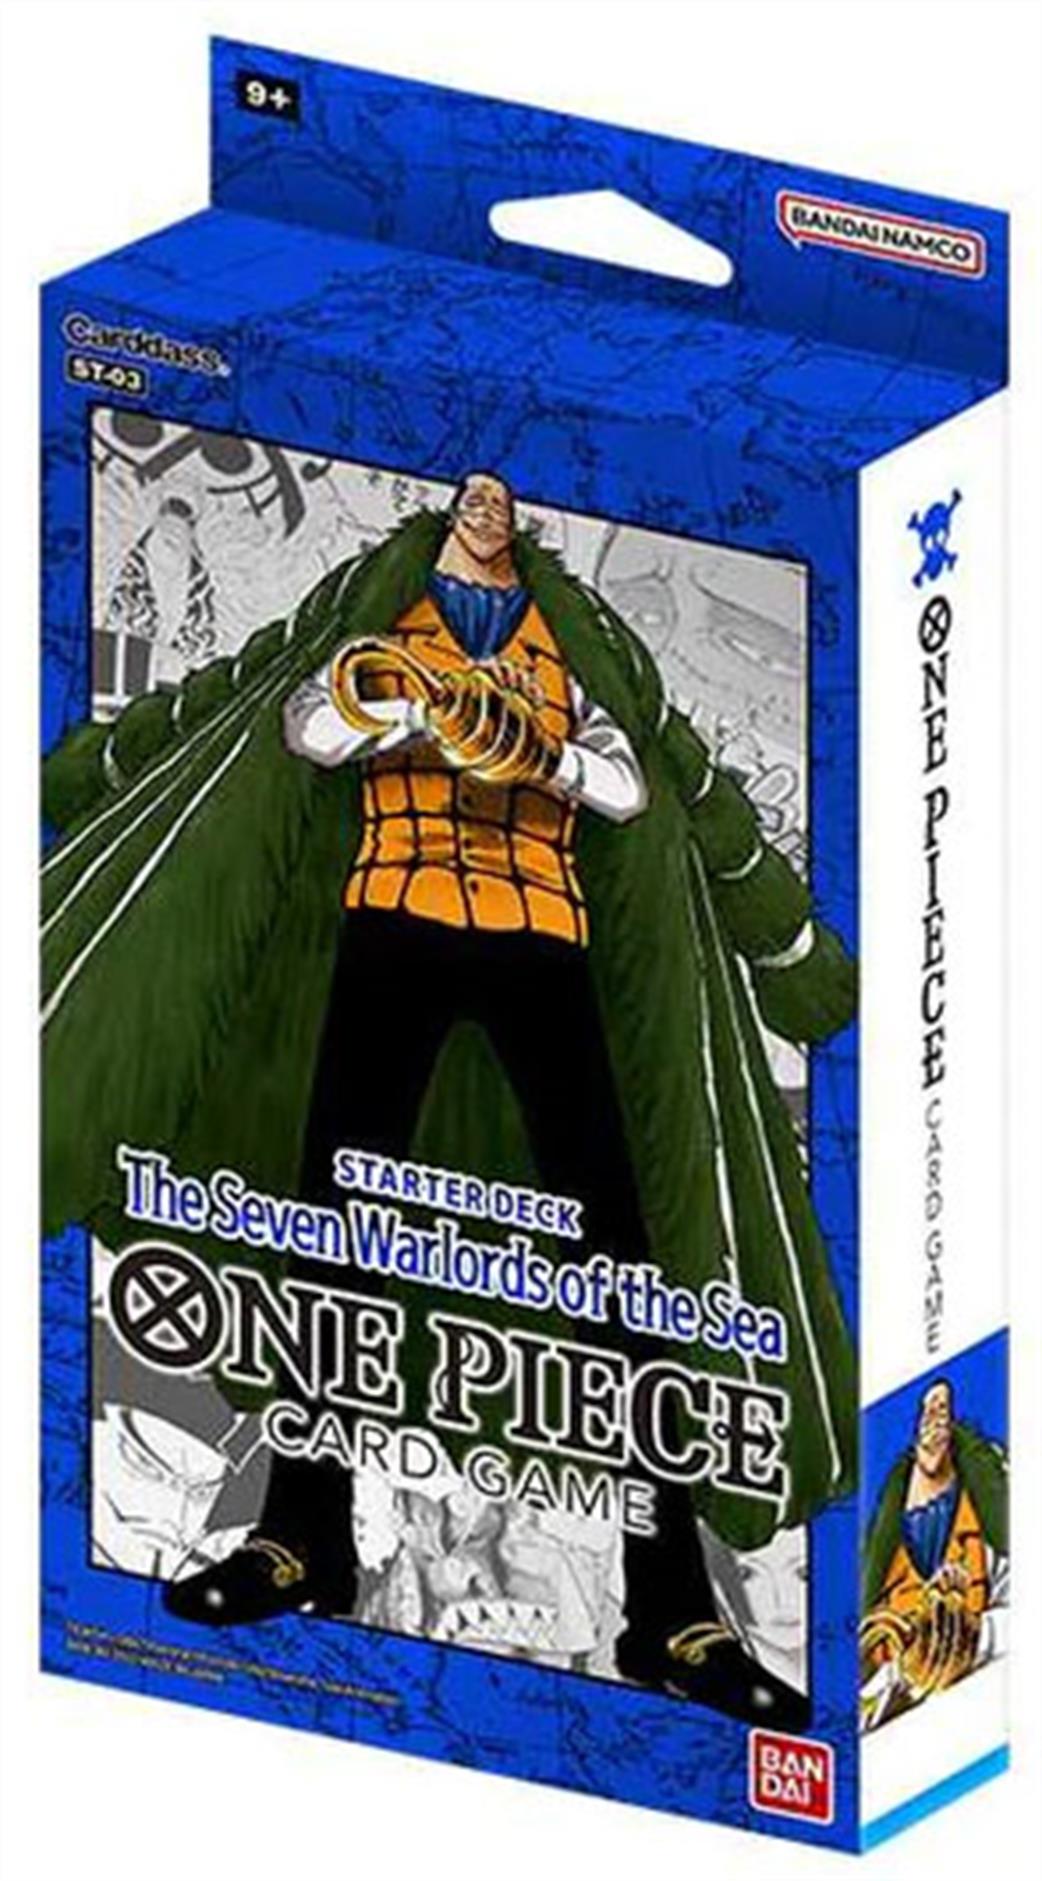 Bandai  ST-03 One Piece The Seven Warlords of the Sea Starter Deck